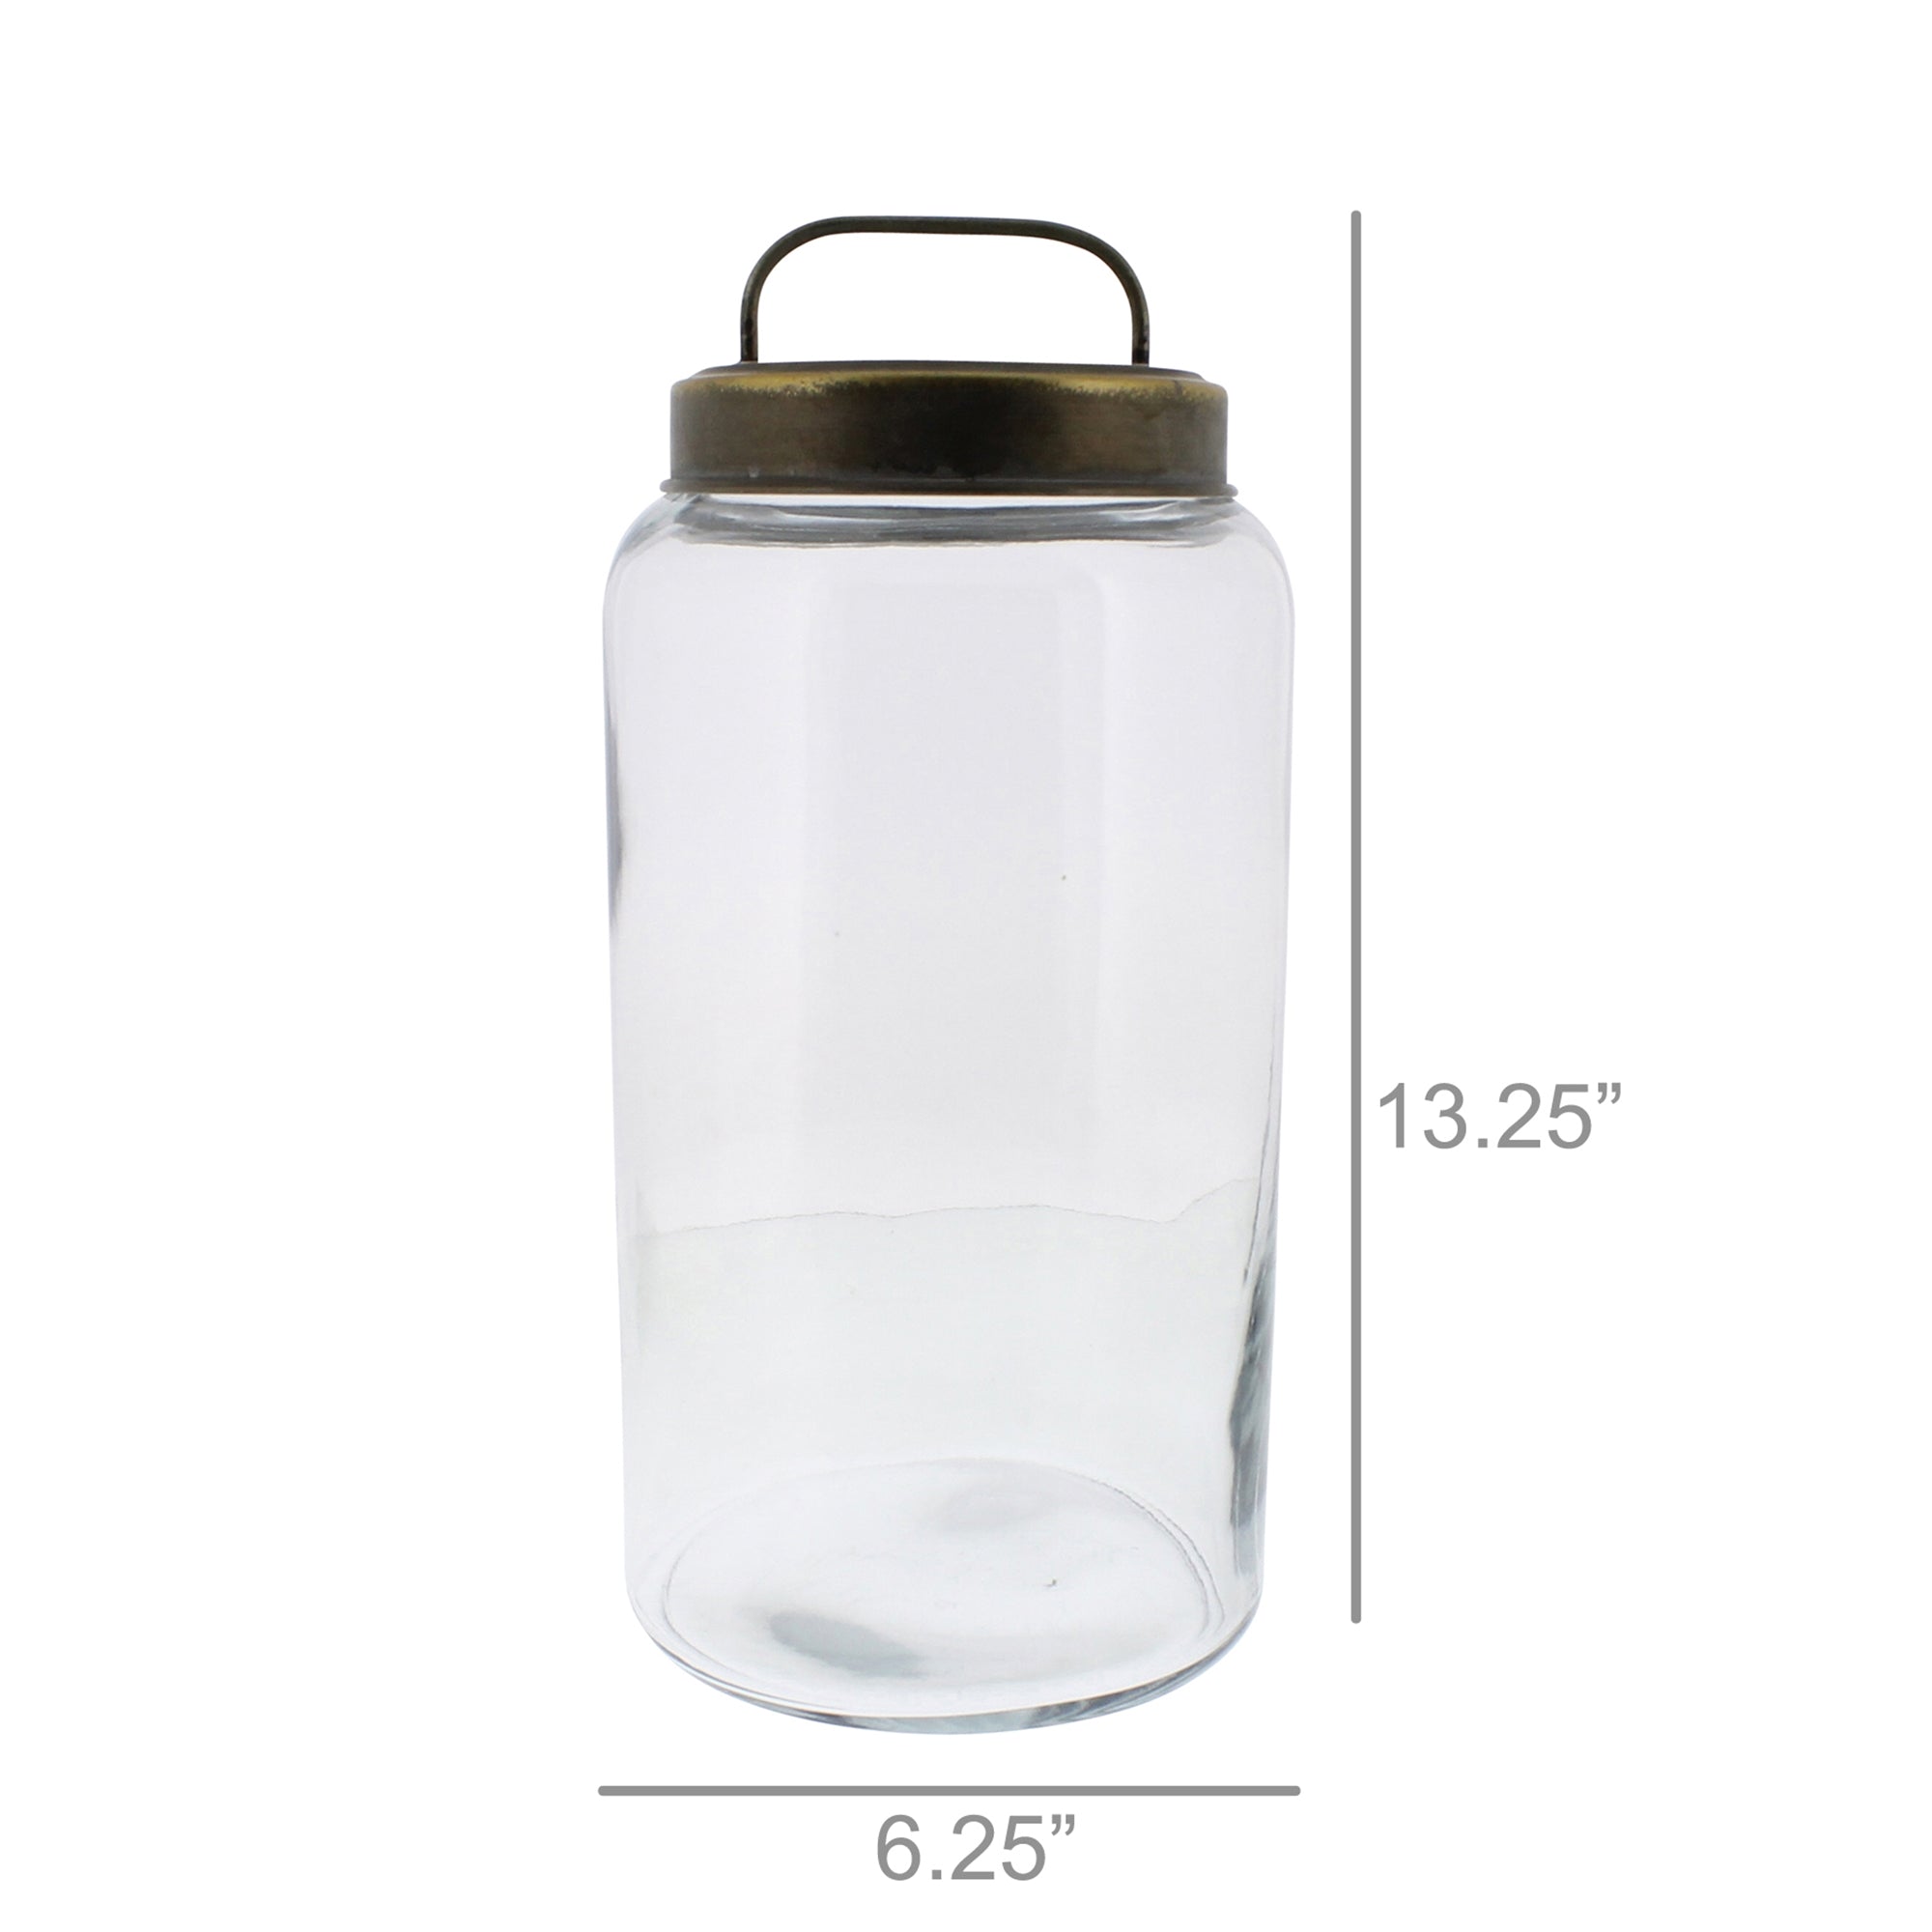 Archer Clear Glass Canister With Metal Lid by HomArt